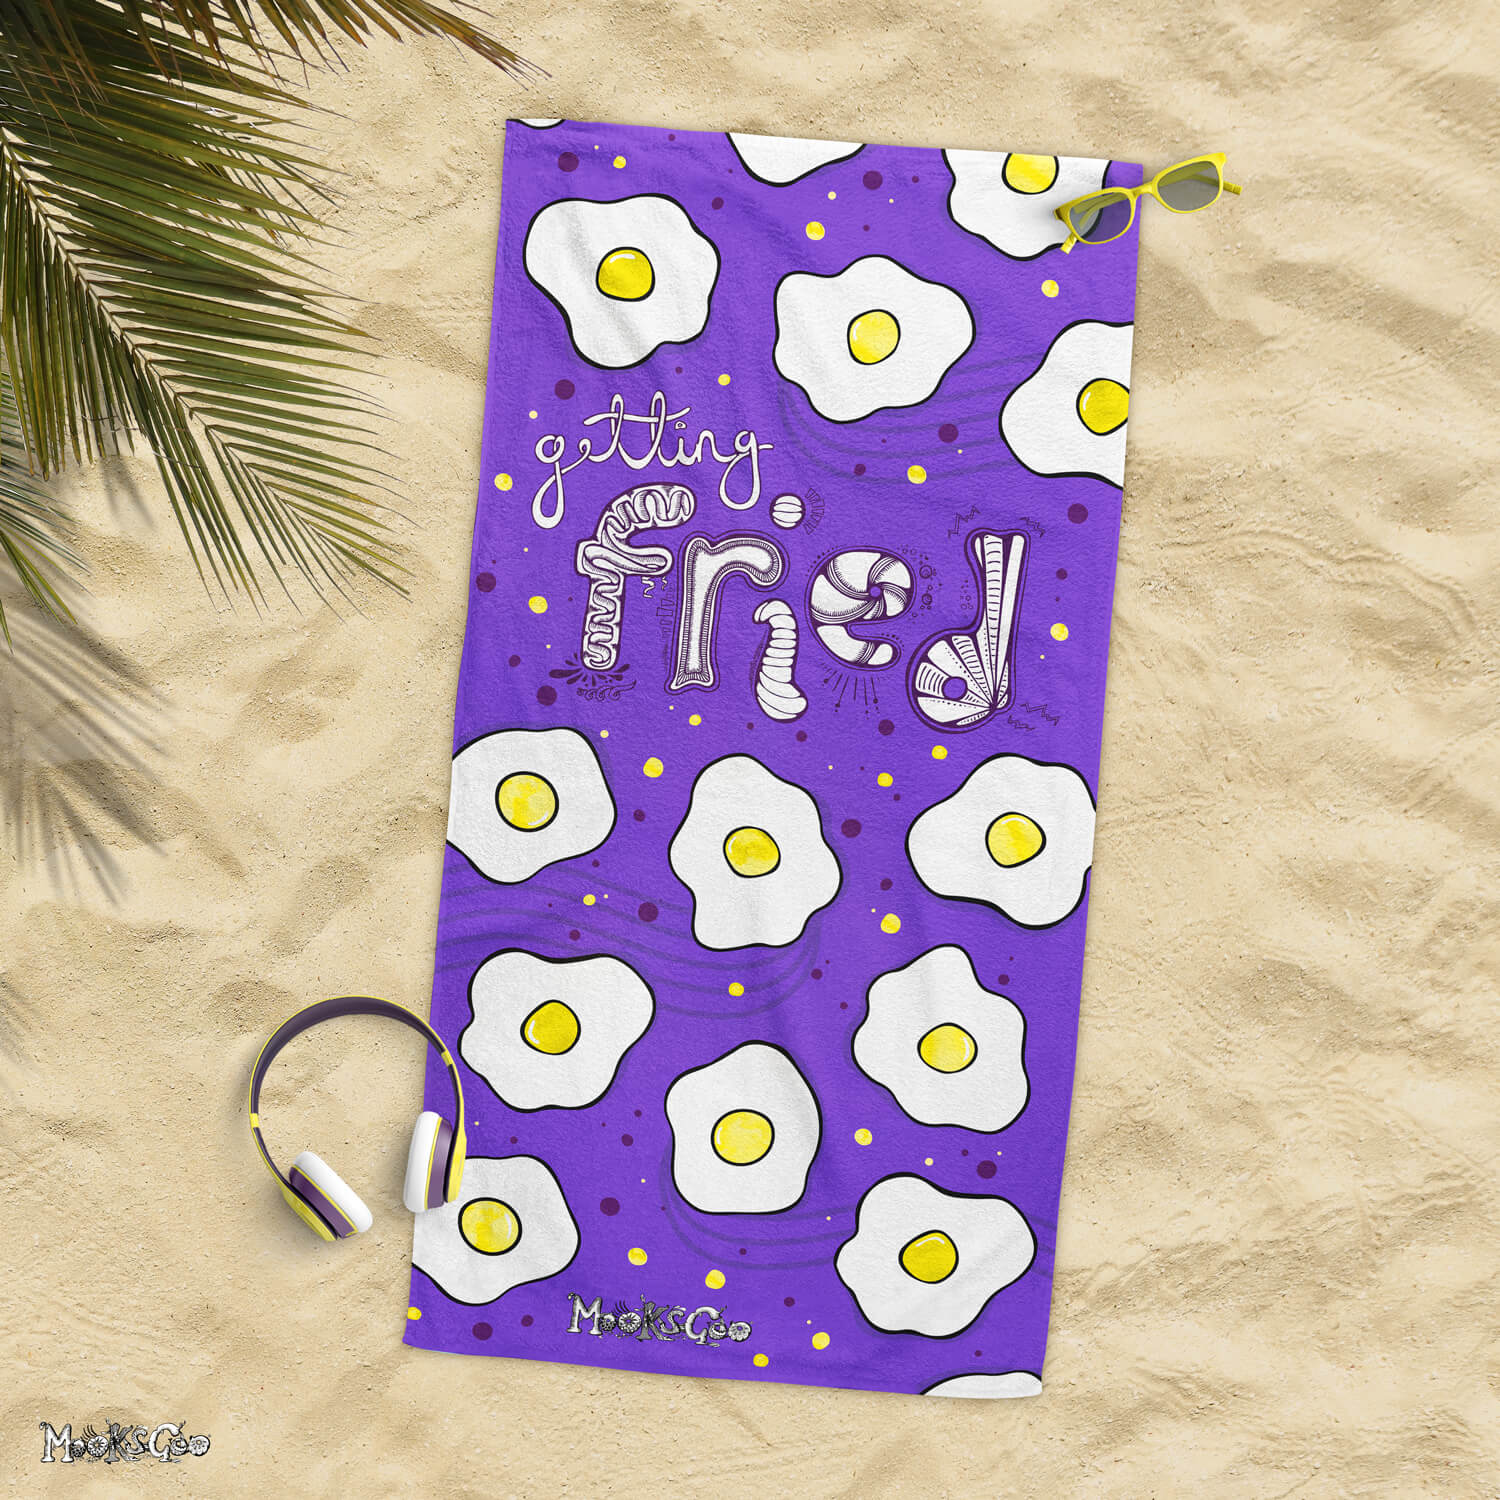 Getting Fried beach or bathroom towel with illustrated fried eggs, laying flat on a sandy beach, designed by MooksGoo